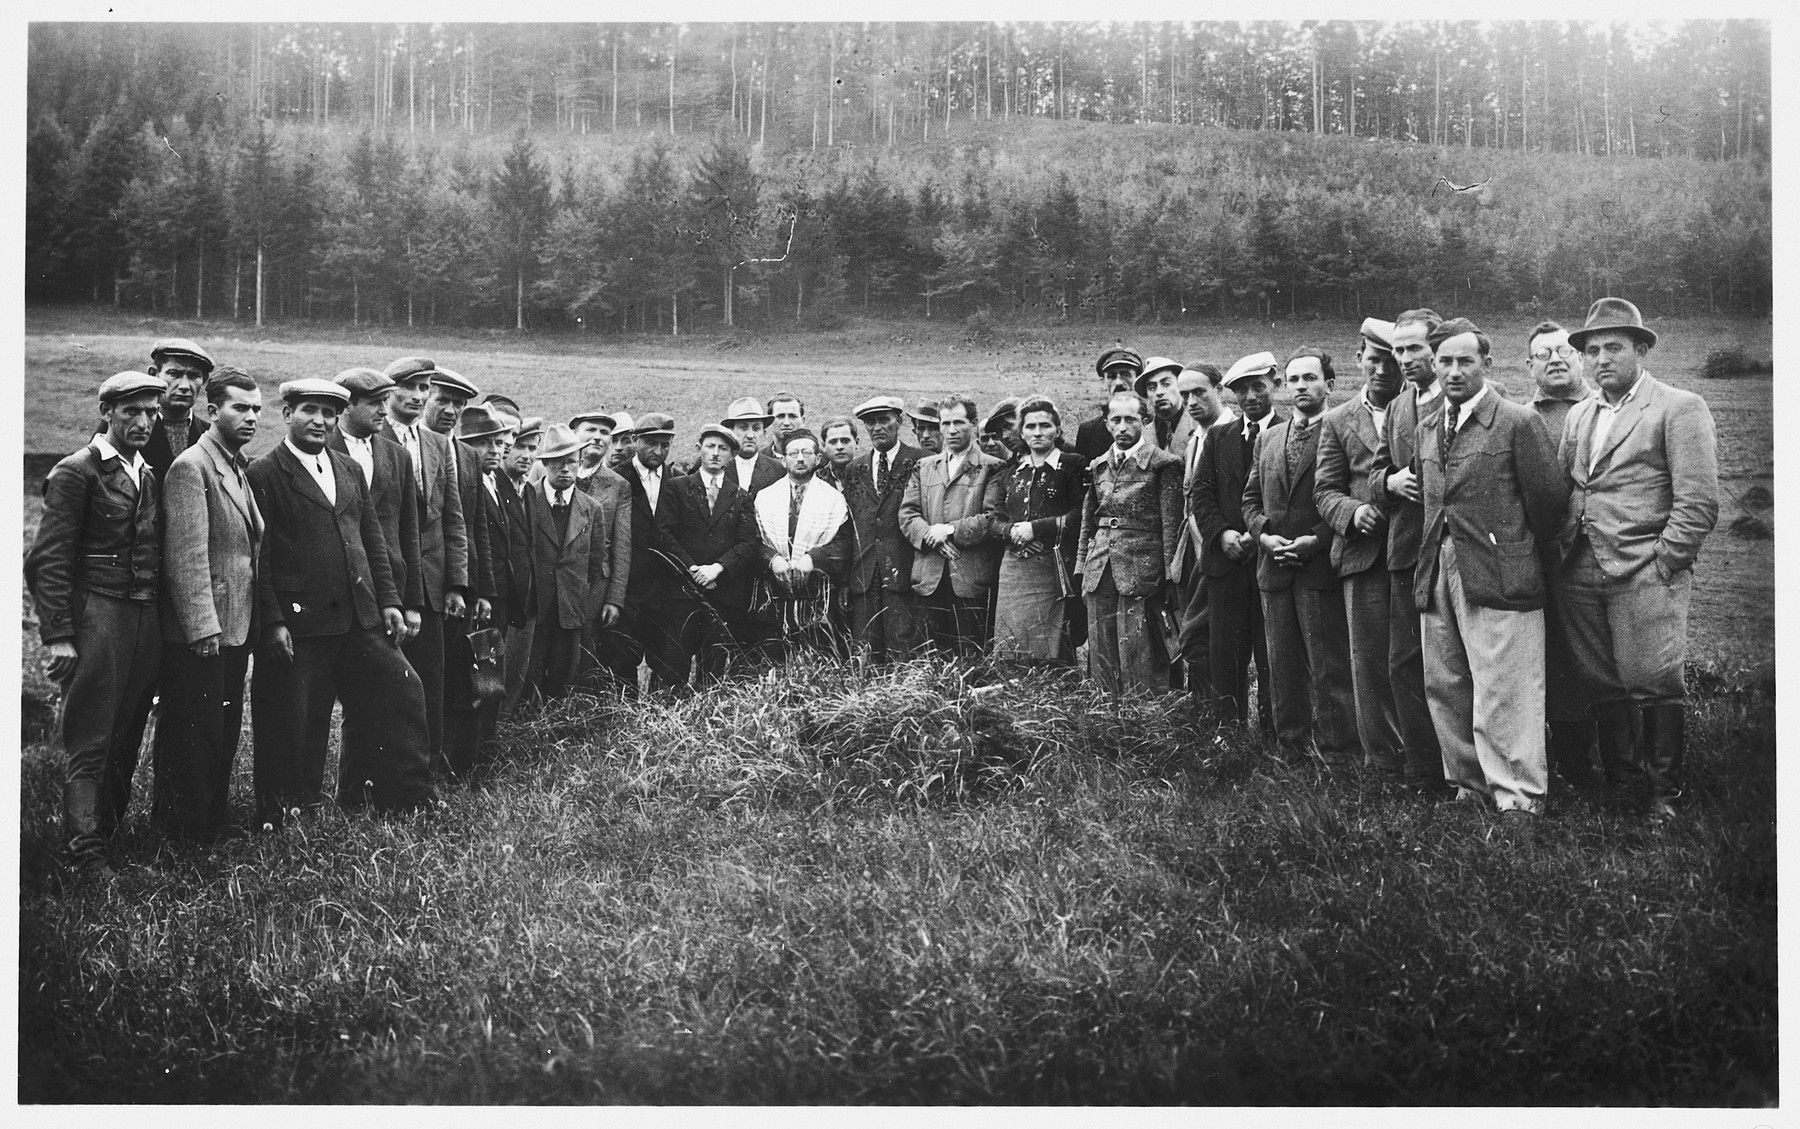 Jewish DPs attend a memorial service in a field in Traunstein, Germany.